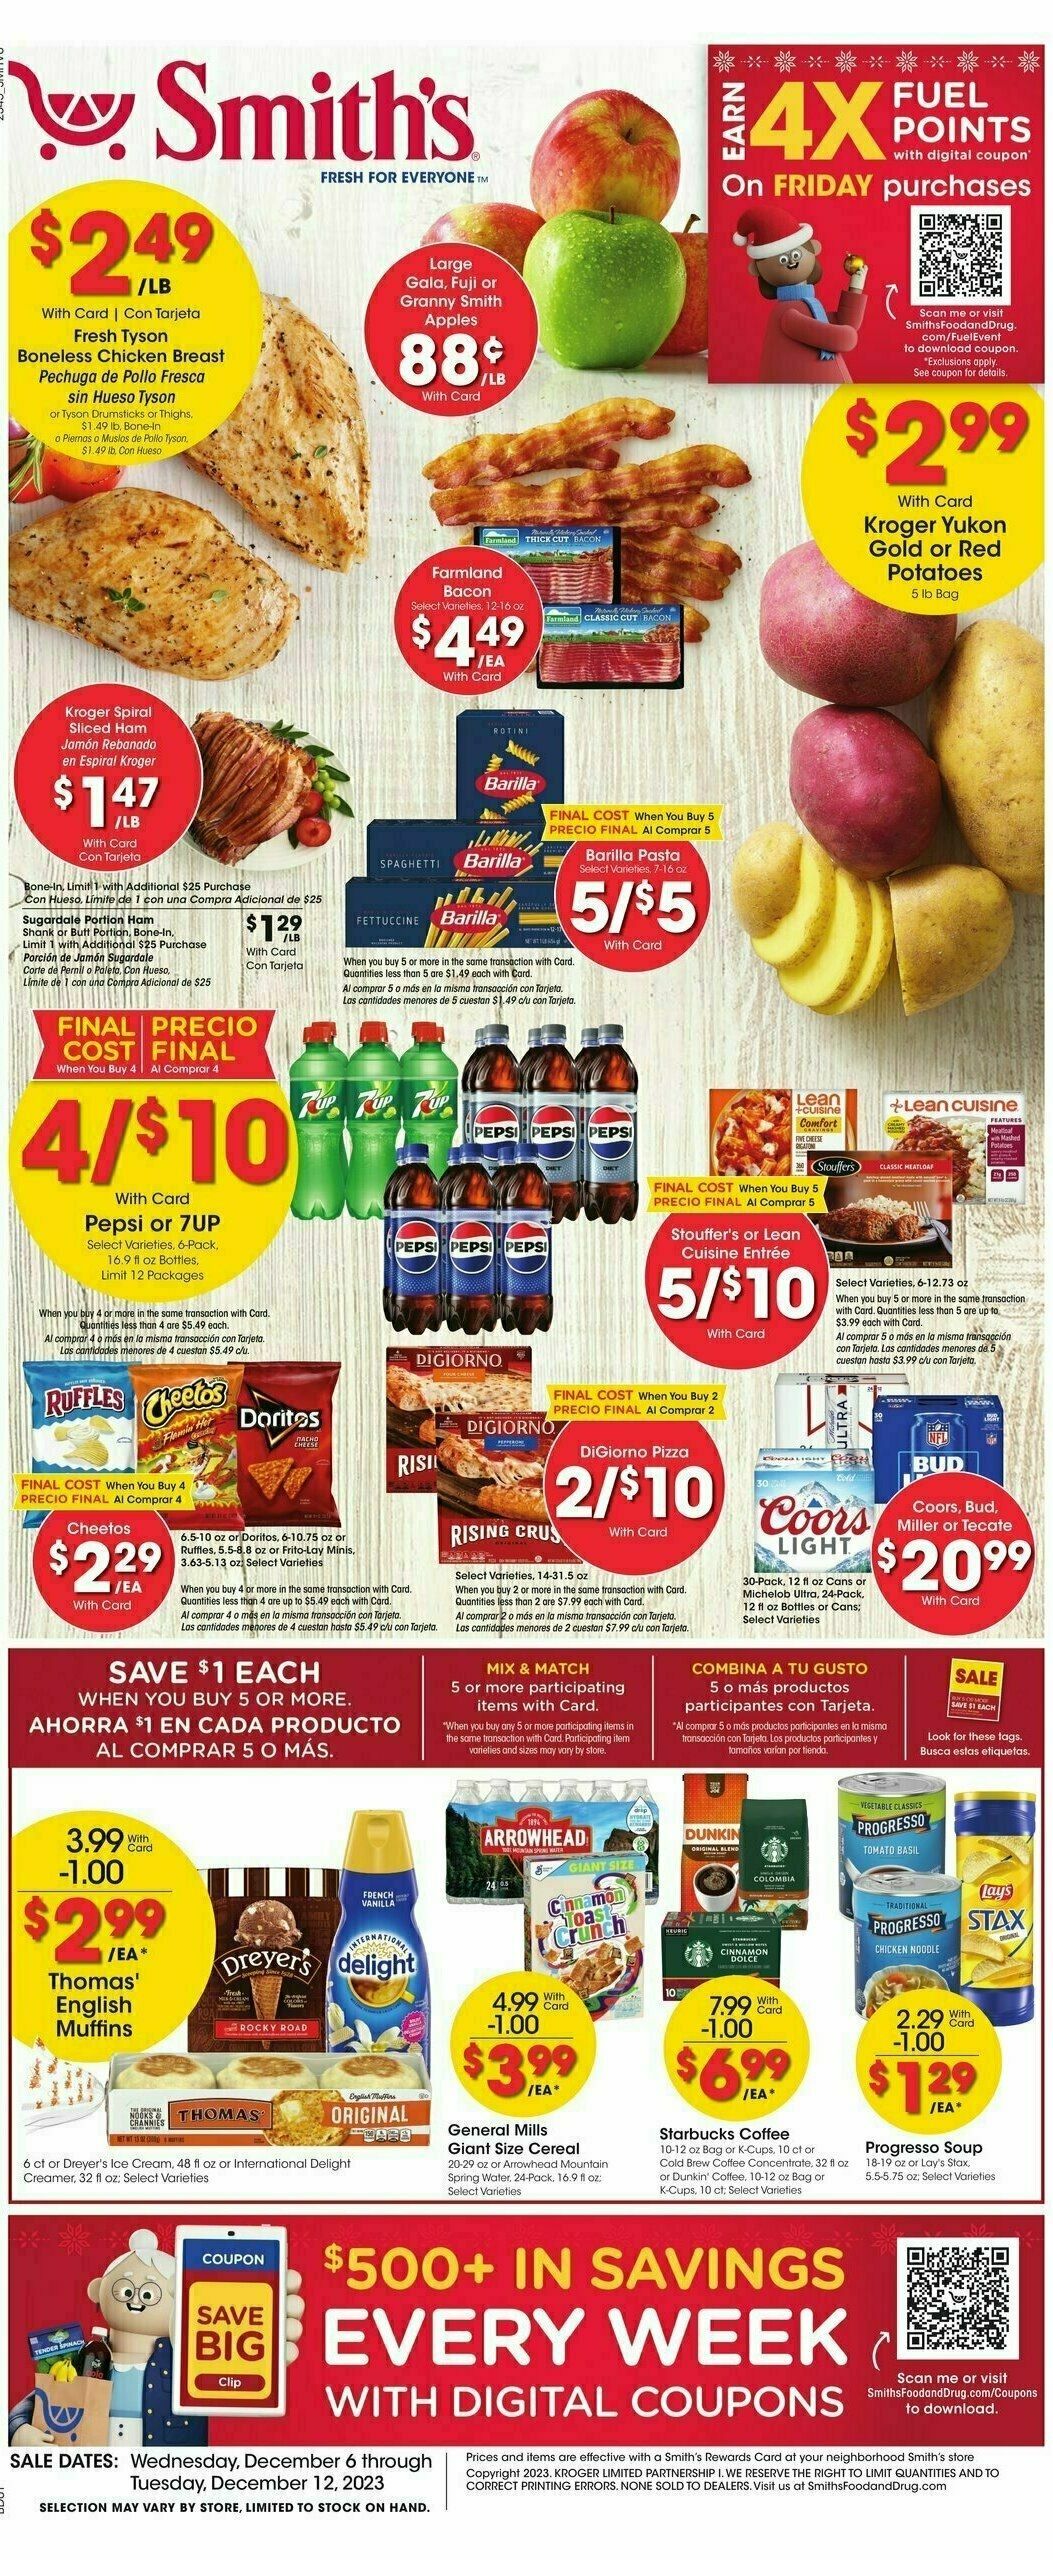 Smith's Weekly Ad from December 6